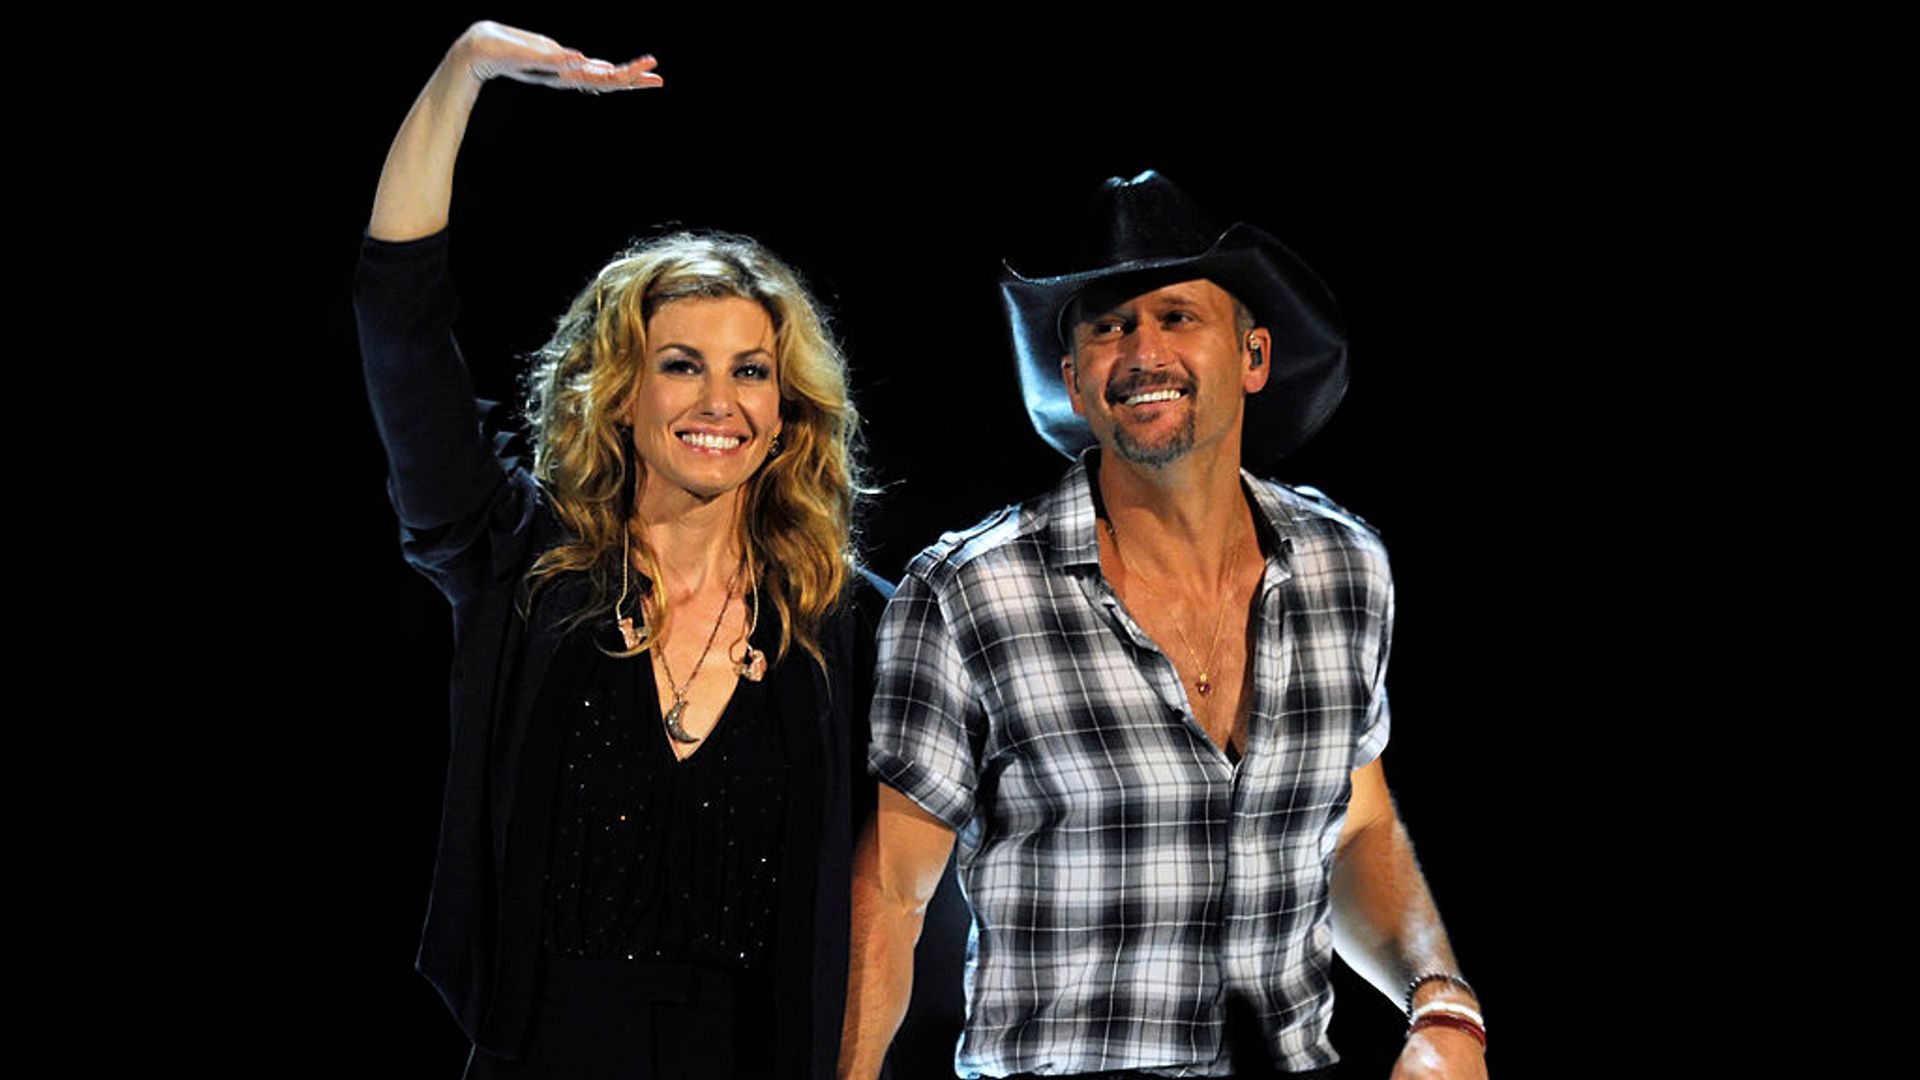 Faith Hill and Tim McGraw holding hands as they walk on stage. Faith waves at the crowd with her other hand. 